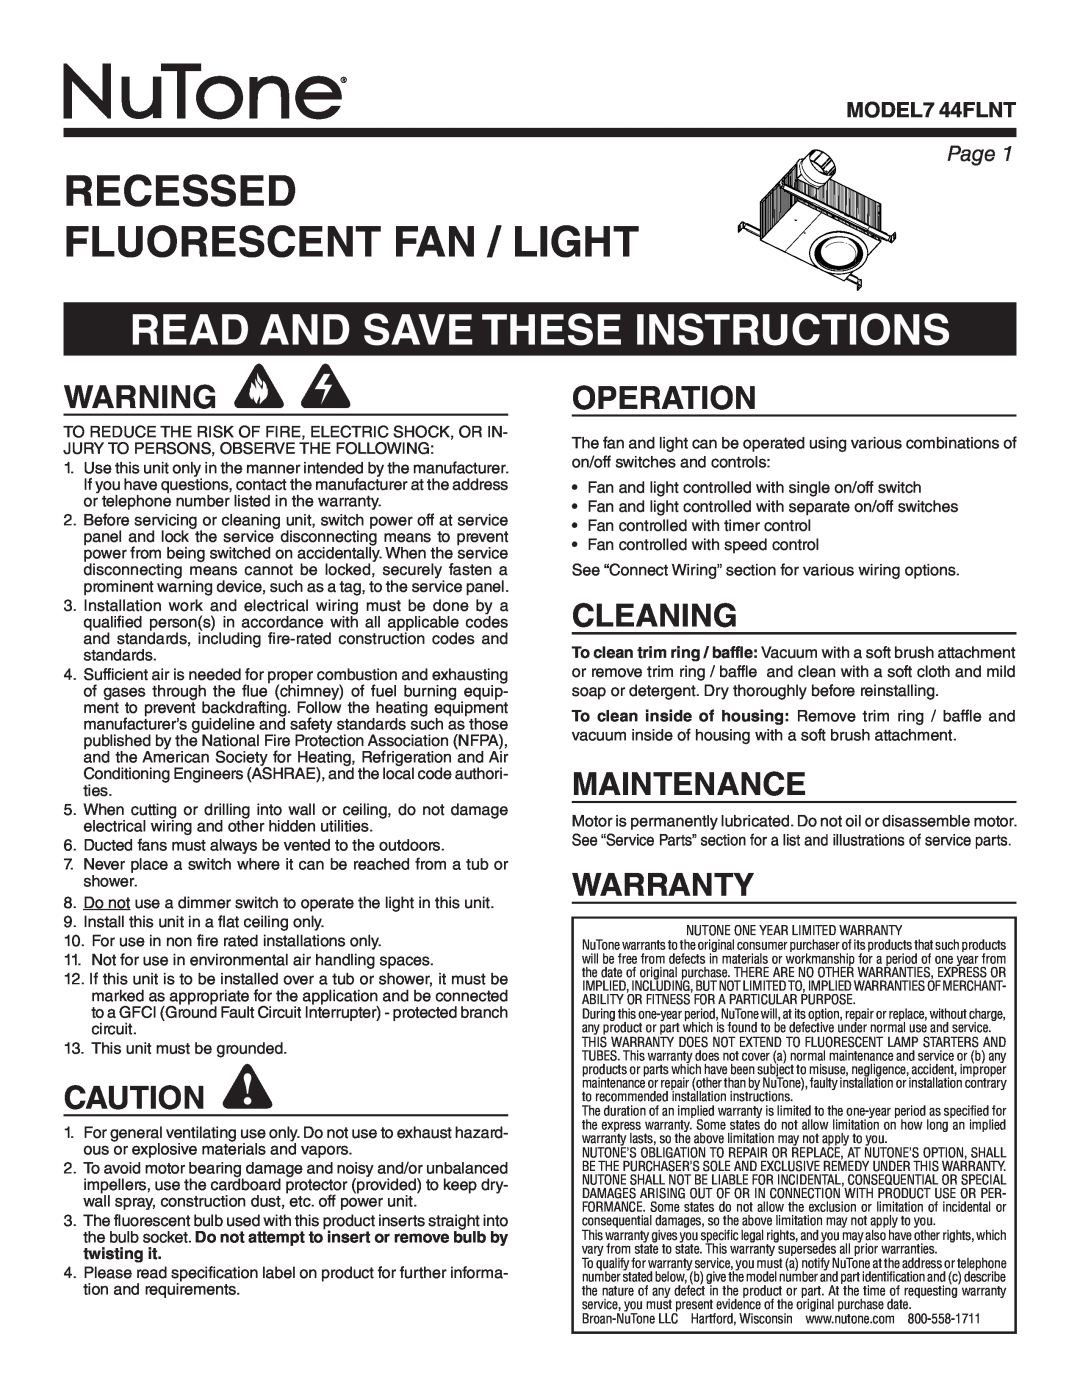 NuTone 744FLNT warranty Recessed Fluorescent Fan / Light, Read And Save These Instructions, Operation, Cleaning, Warranty 